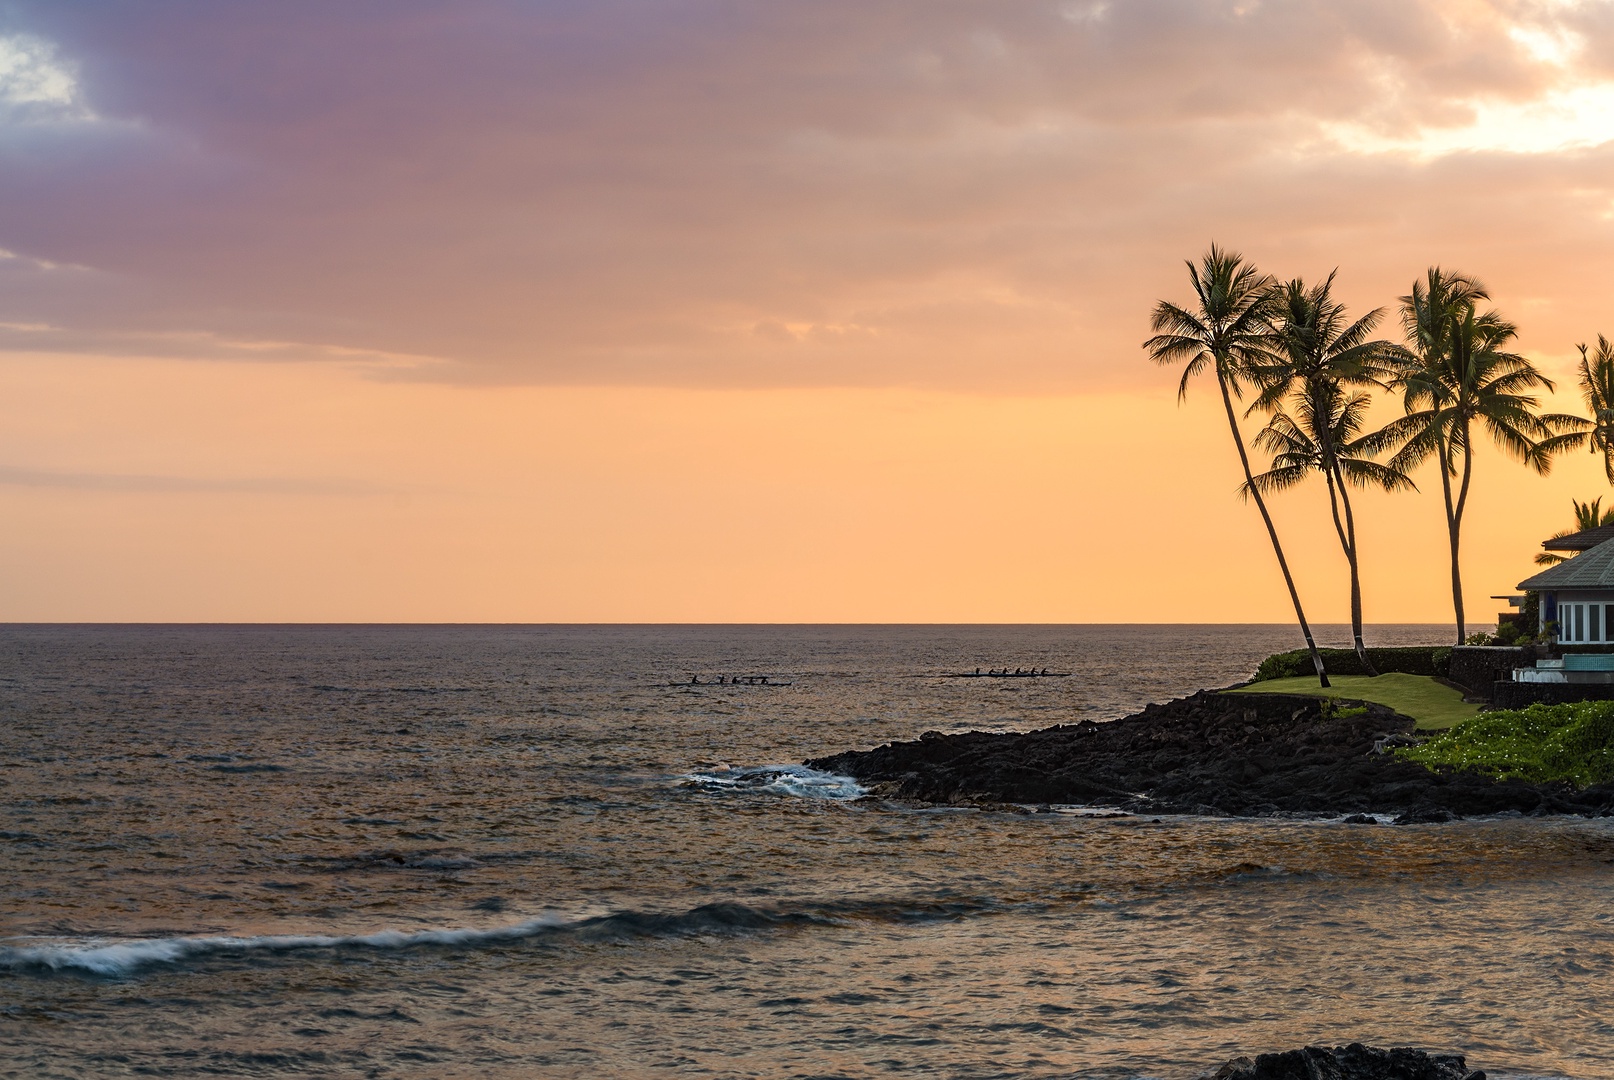 Kailua Kona Vacation Rentals, Hale Pua - Watch boats, surfs, and wildlife right from your back yard!